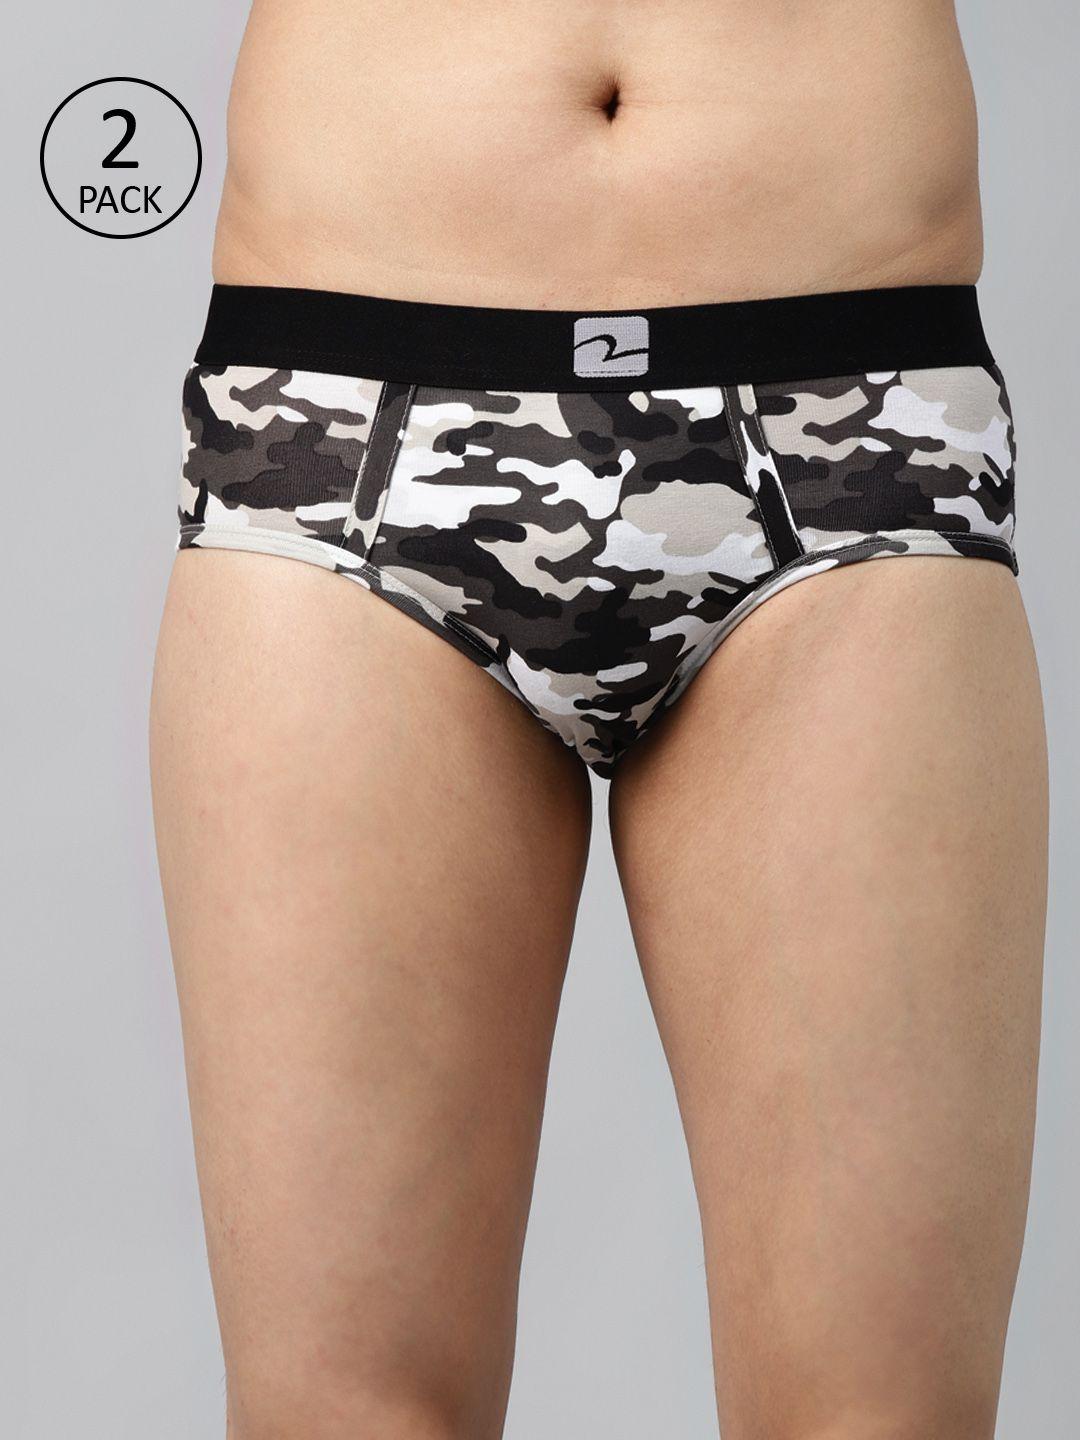 underjeans-by-spykar-pack-of-2-charcoal-grey-&-white-camouflage-print-briefs-8907966429857